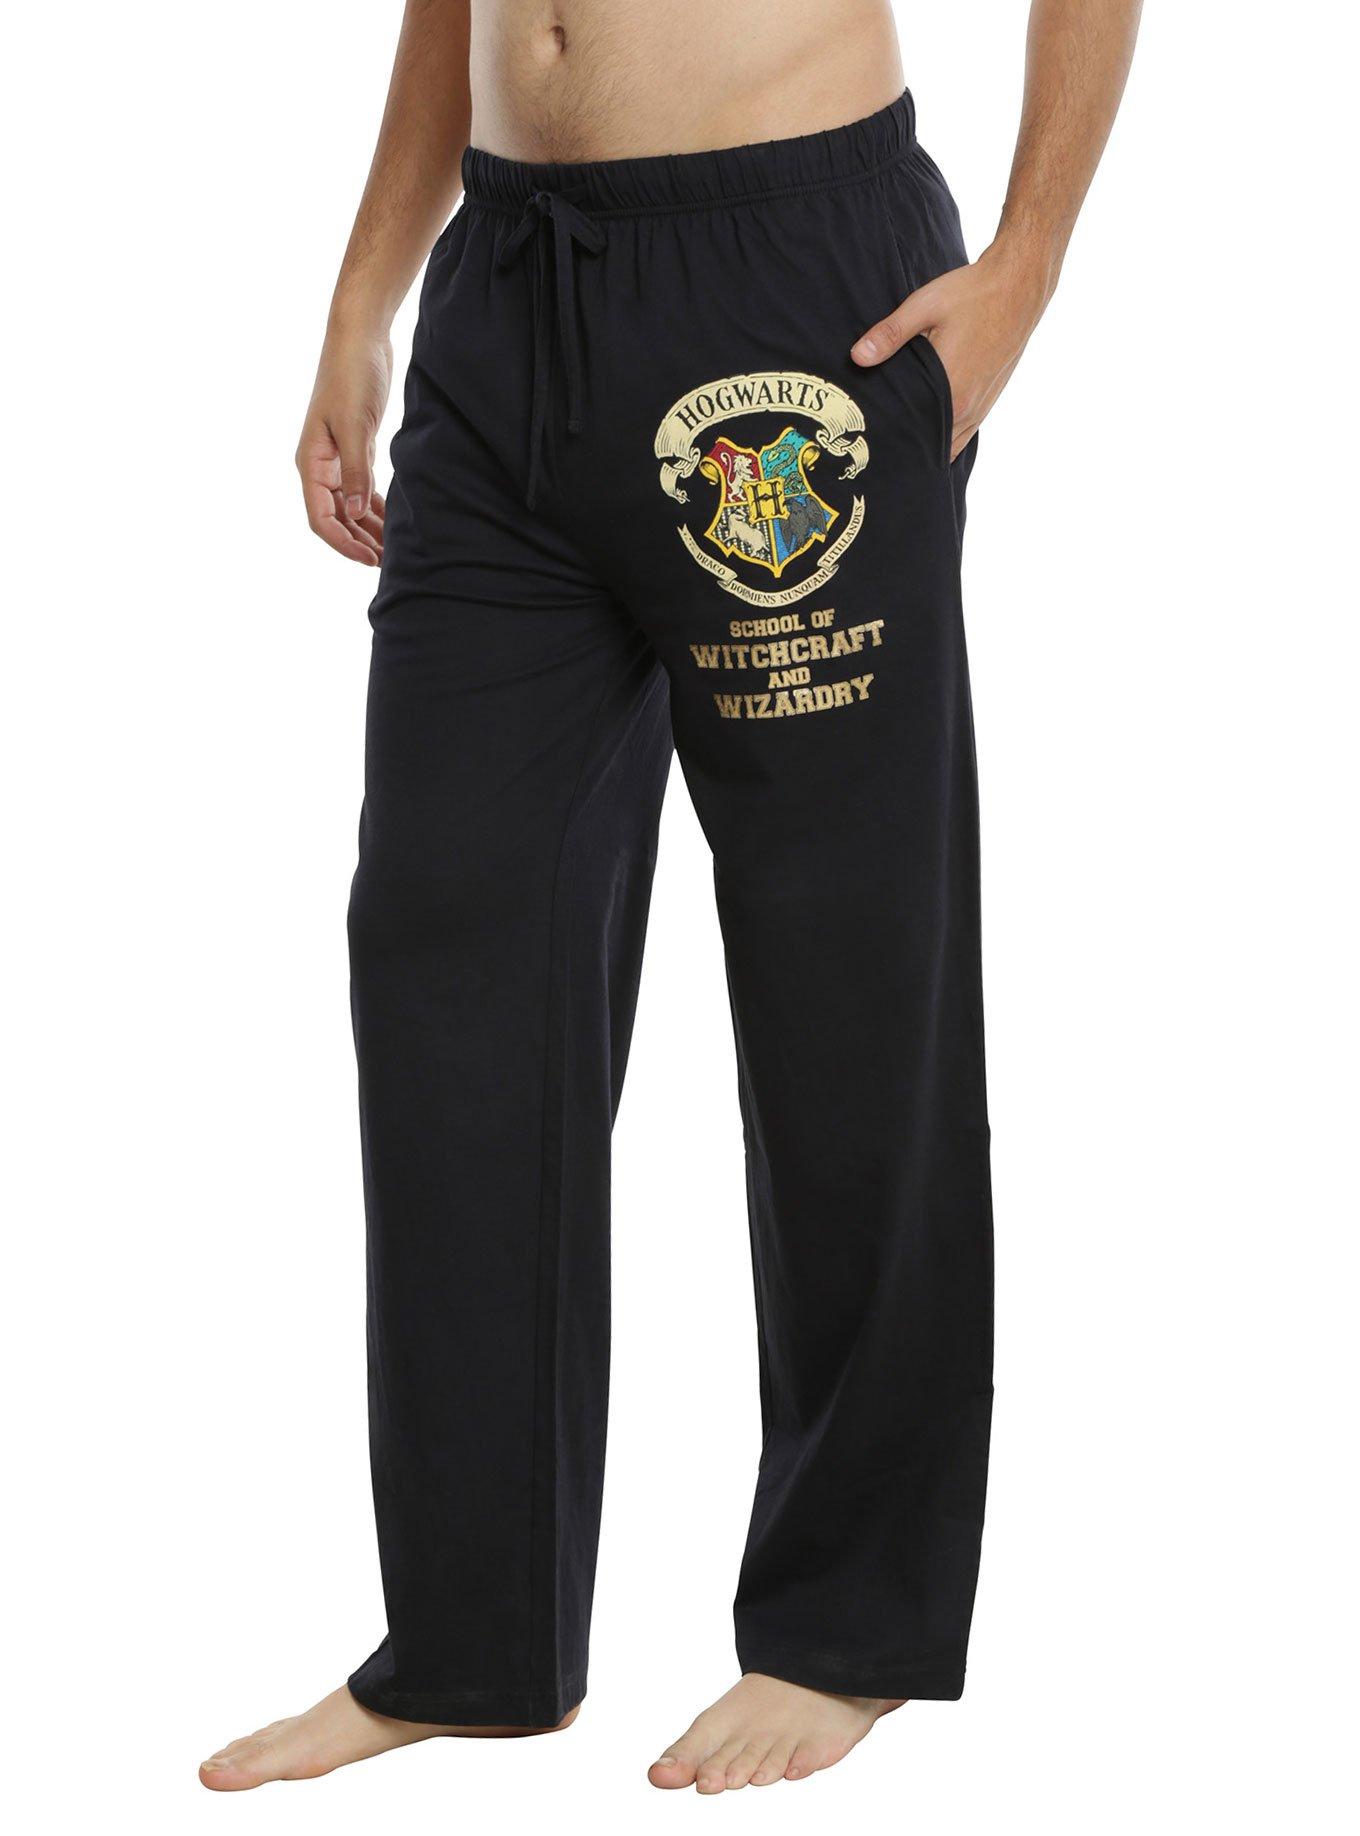 Harry Potter Hogwarts Witchcraft And Wizardry Guys Pajama Pants, BLACK, hi-res